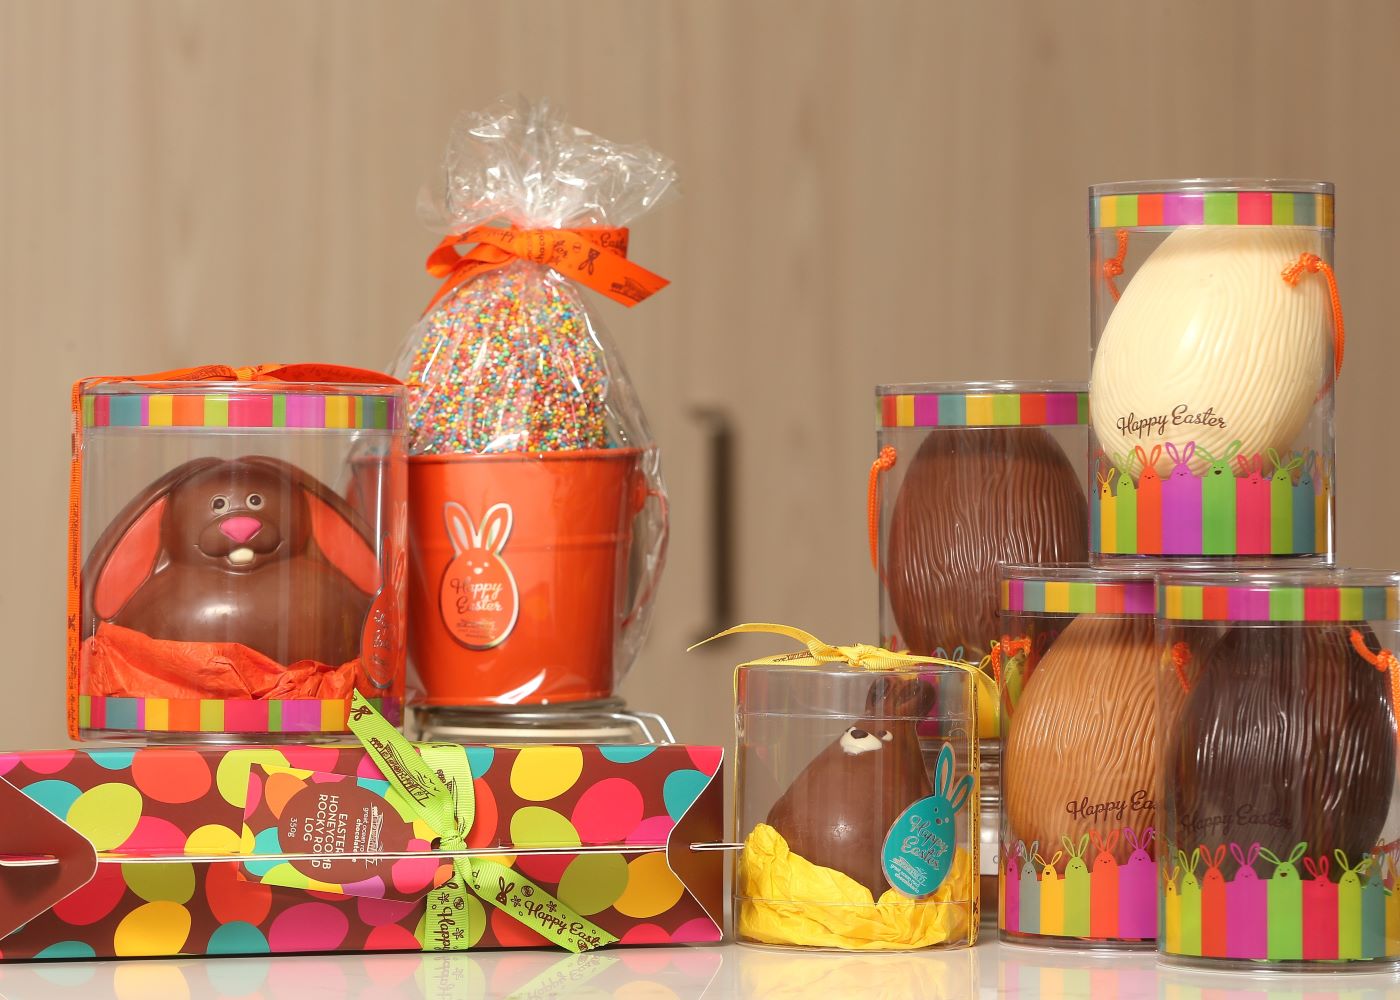 Coles Local stores across Victoria will be home to an exclusive range of chocolate easter eggs from  famed regional supplier the Great Ocean Road Chocolaterie